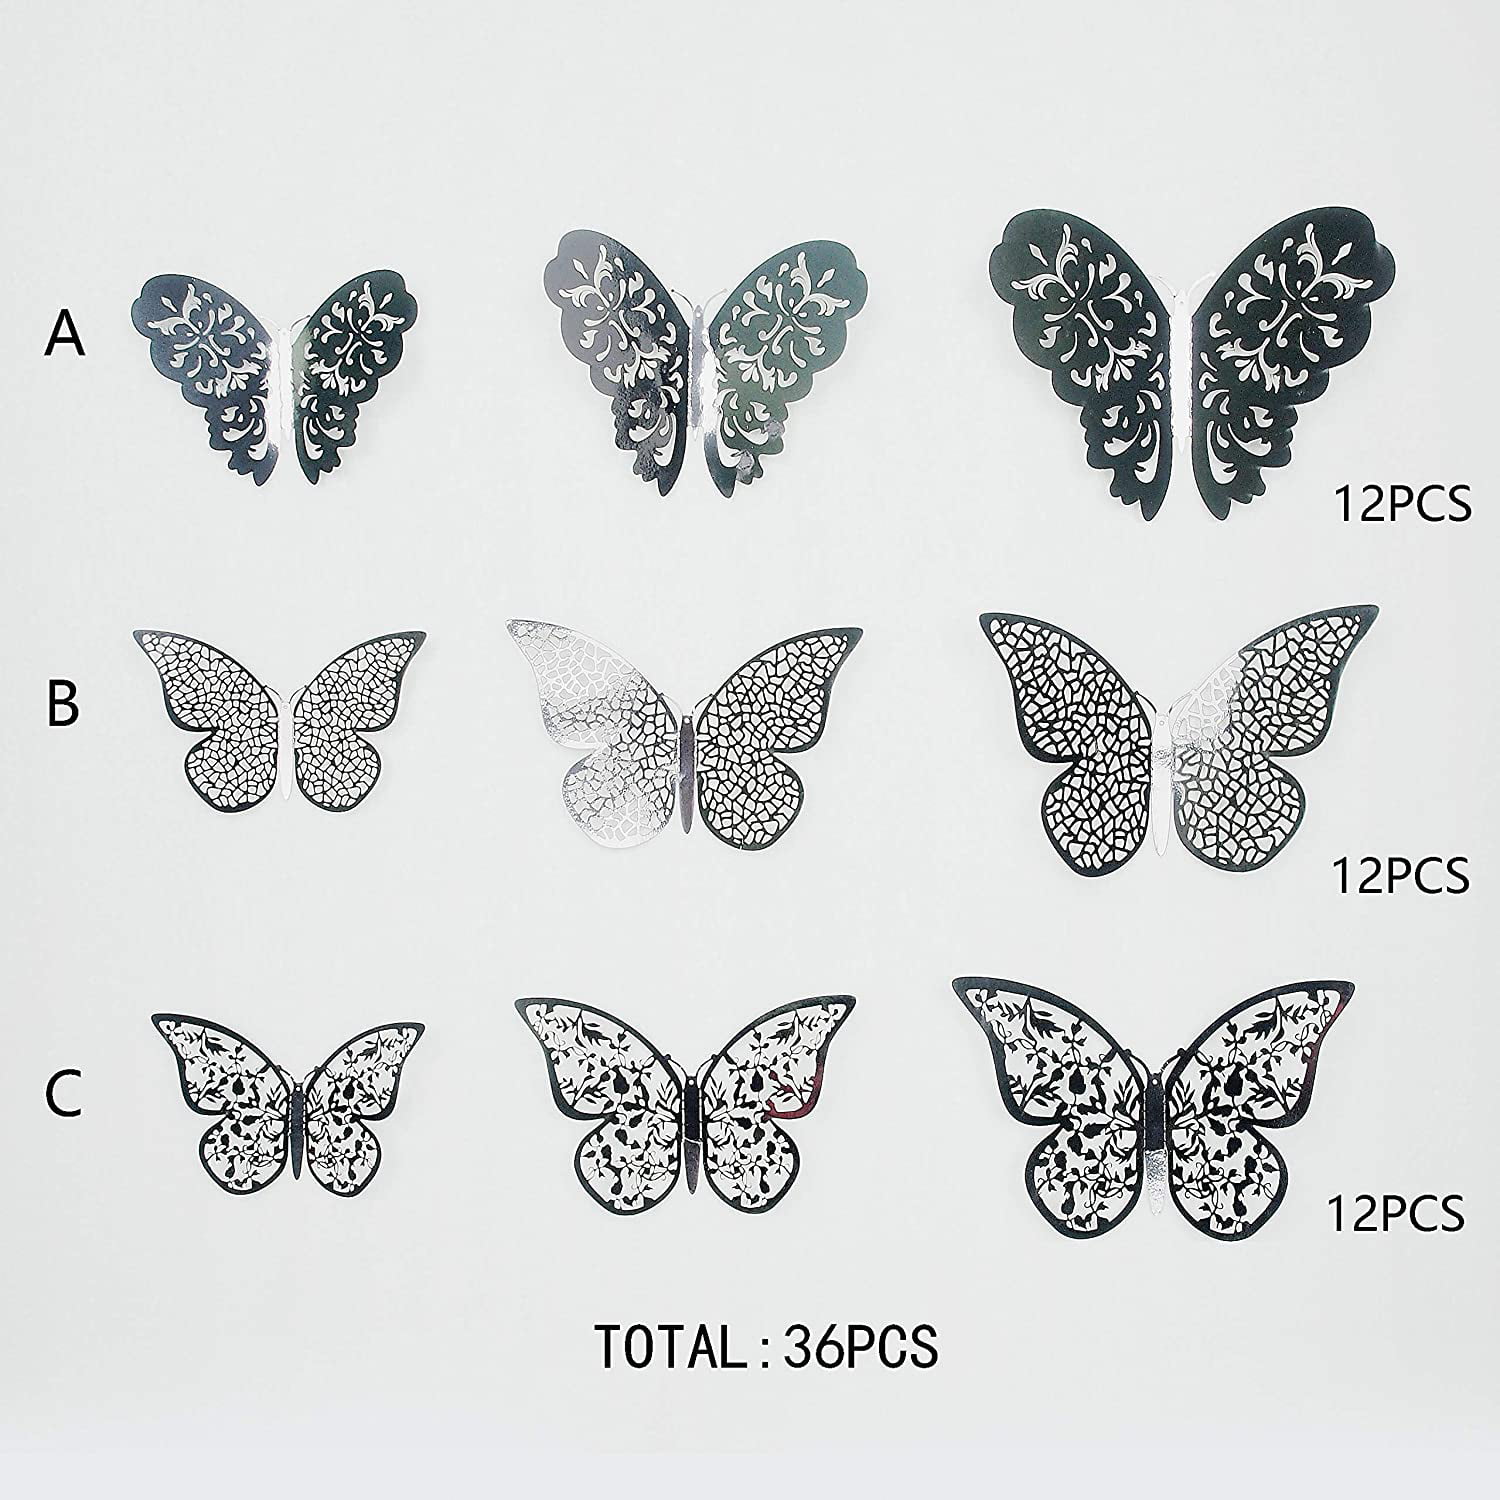 pinkblume Black Gray 3D Butterfly Wall Decor Decals Stickers Removable DIY Metallic Paper Butterflie Wall Murals Decorations for Home Living Room Babys Bedroom Showcase Nursery Wall Art Decor 36PCS